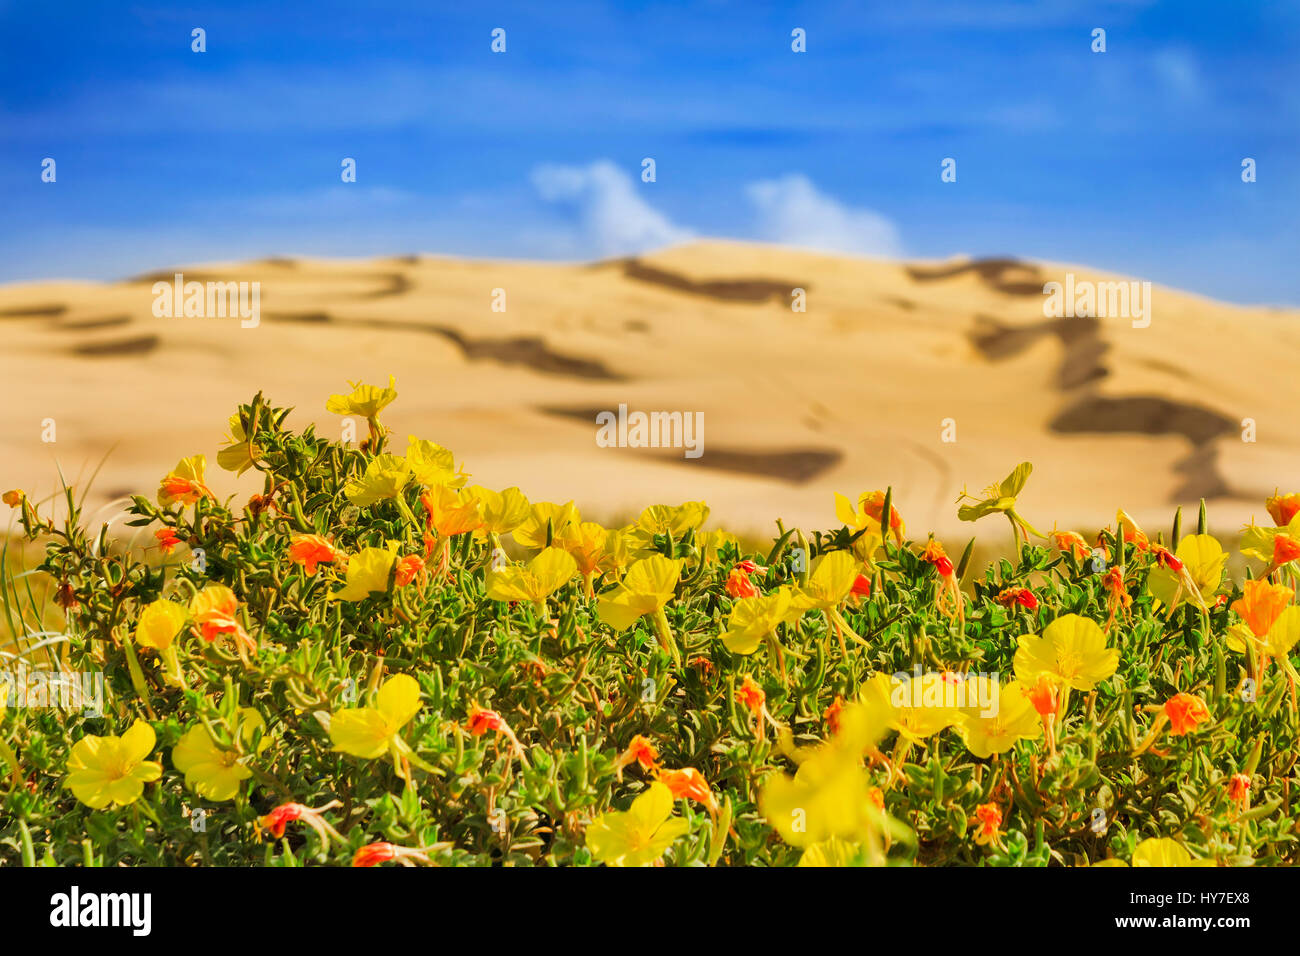 Blooming yellow red flowers in front of arid sand dunes of Stockton beach, NSW pacific coast, Australia. Stock Photo